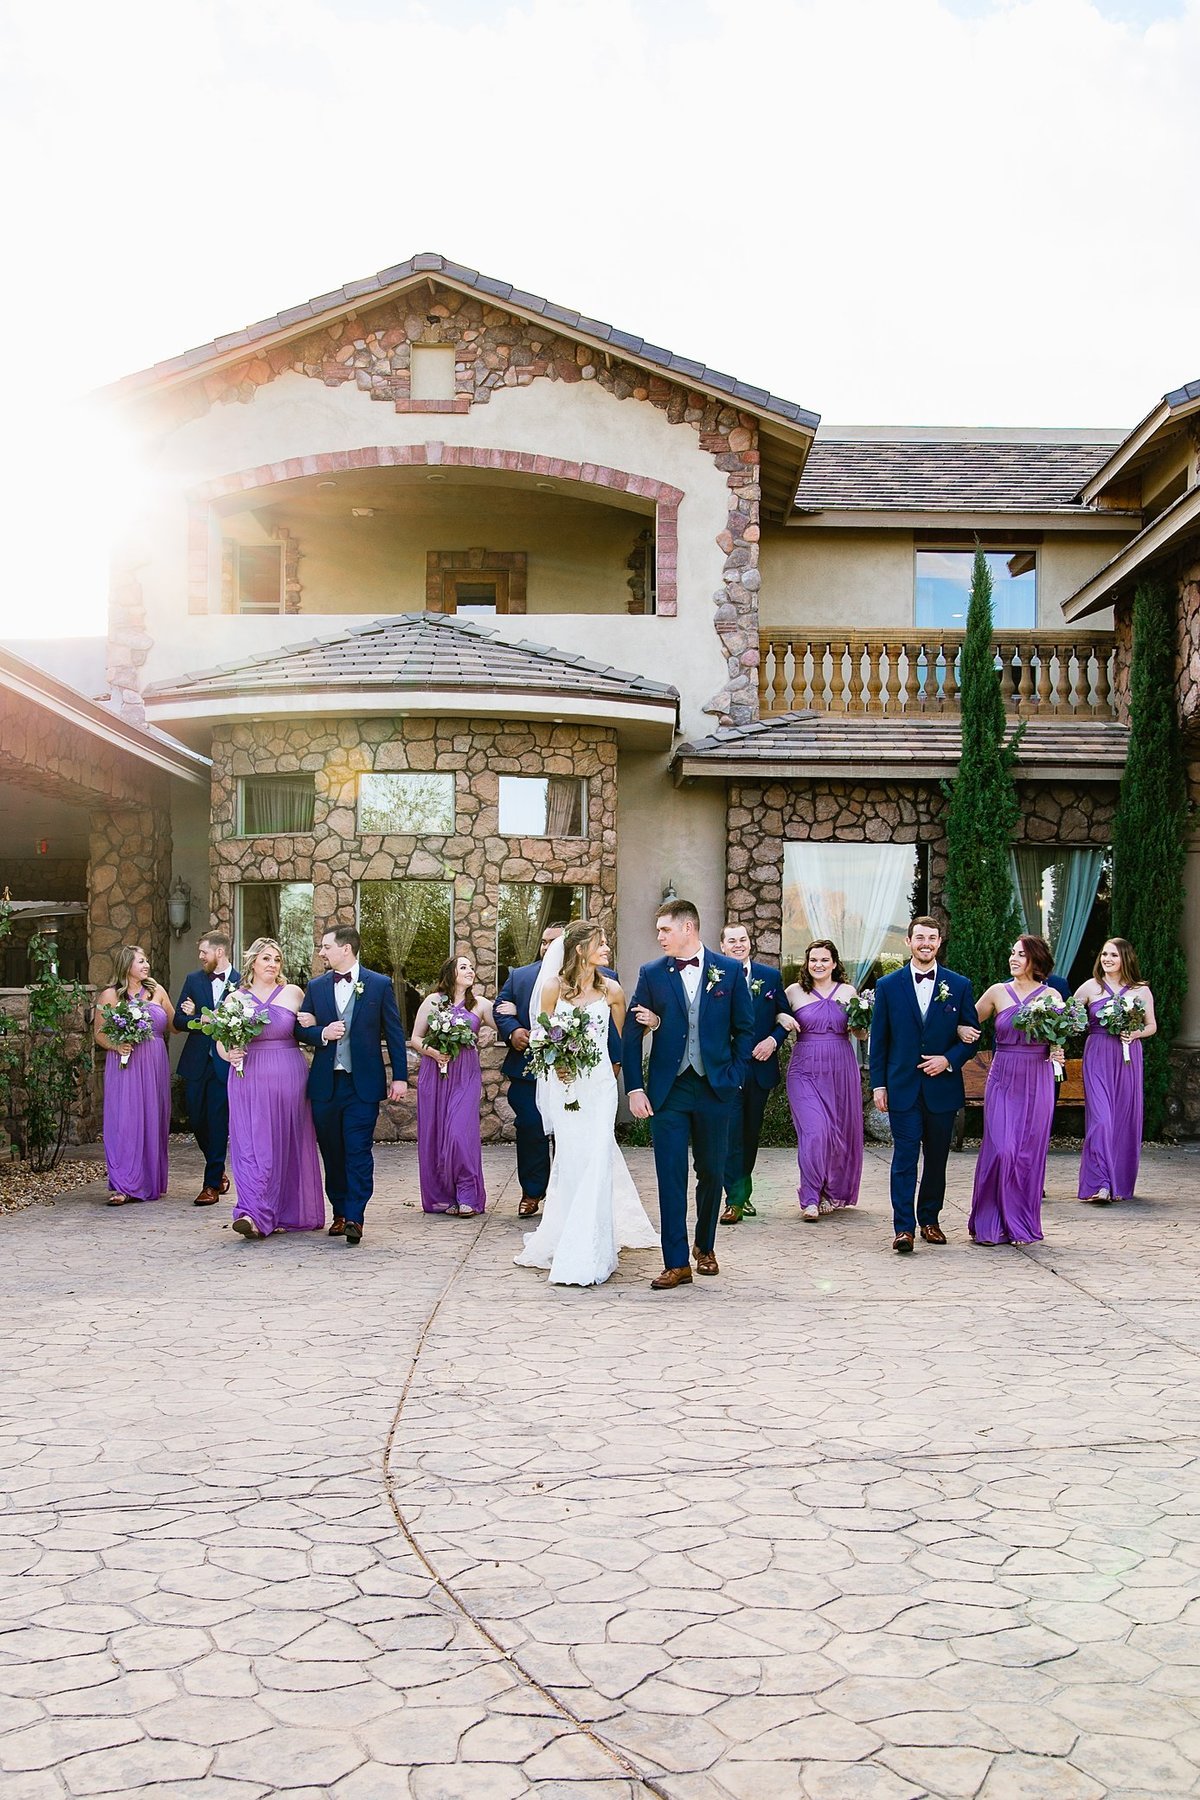 Bridal party walking together with the bride and groom at Superstition Manor by PMA Photography.